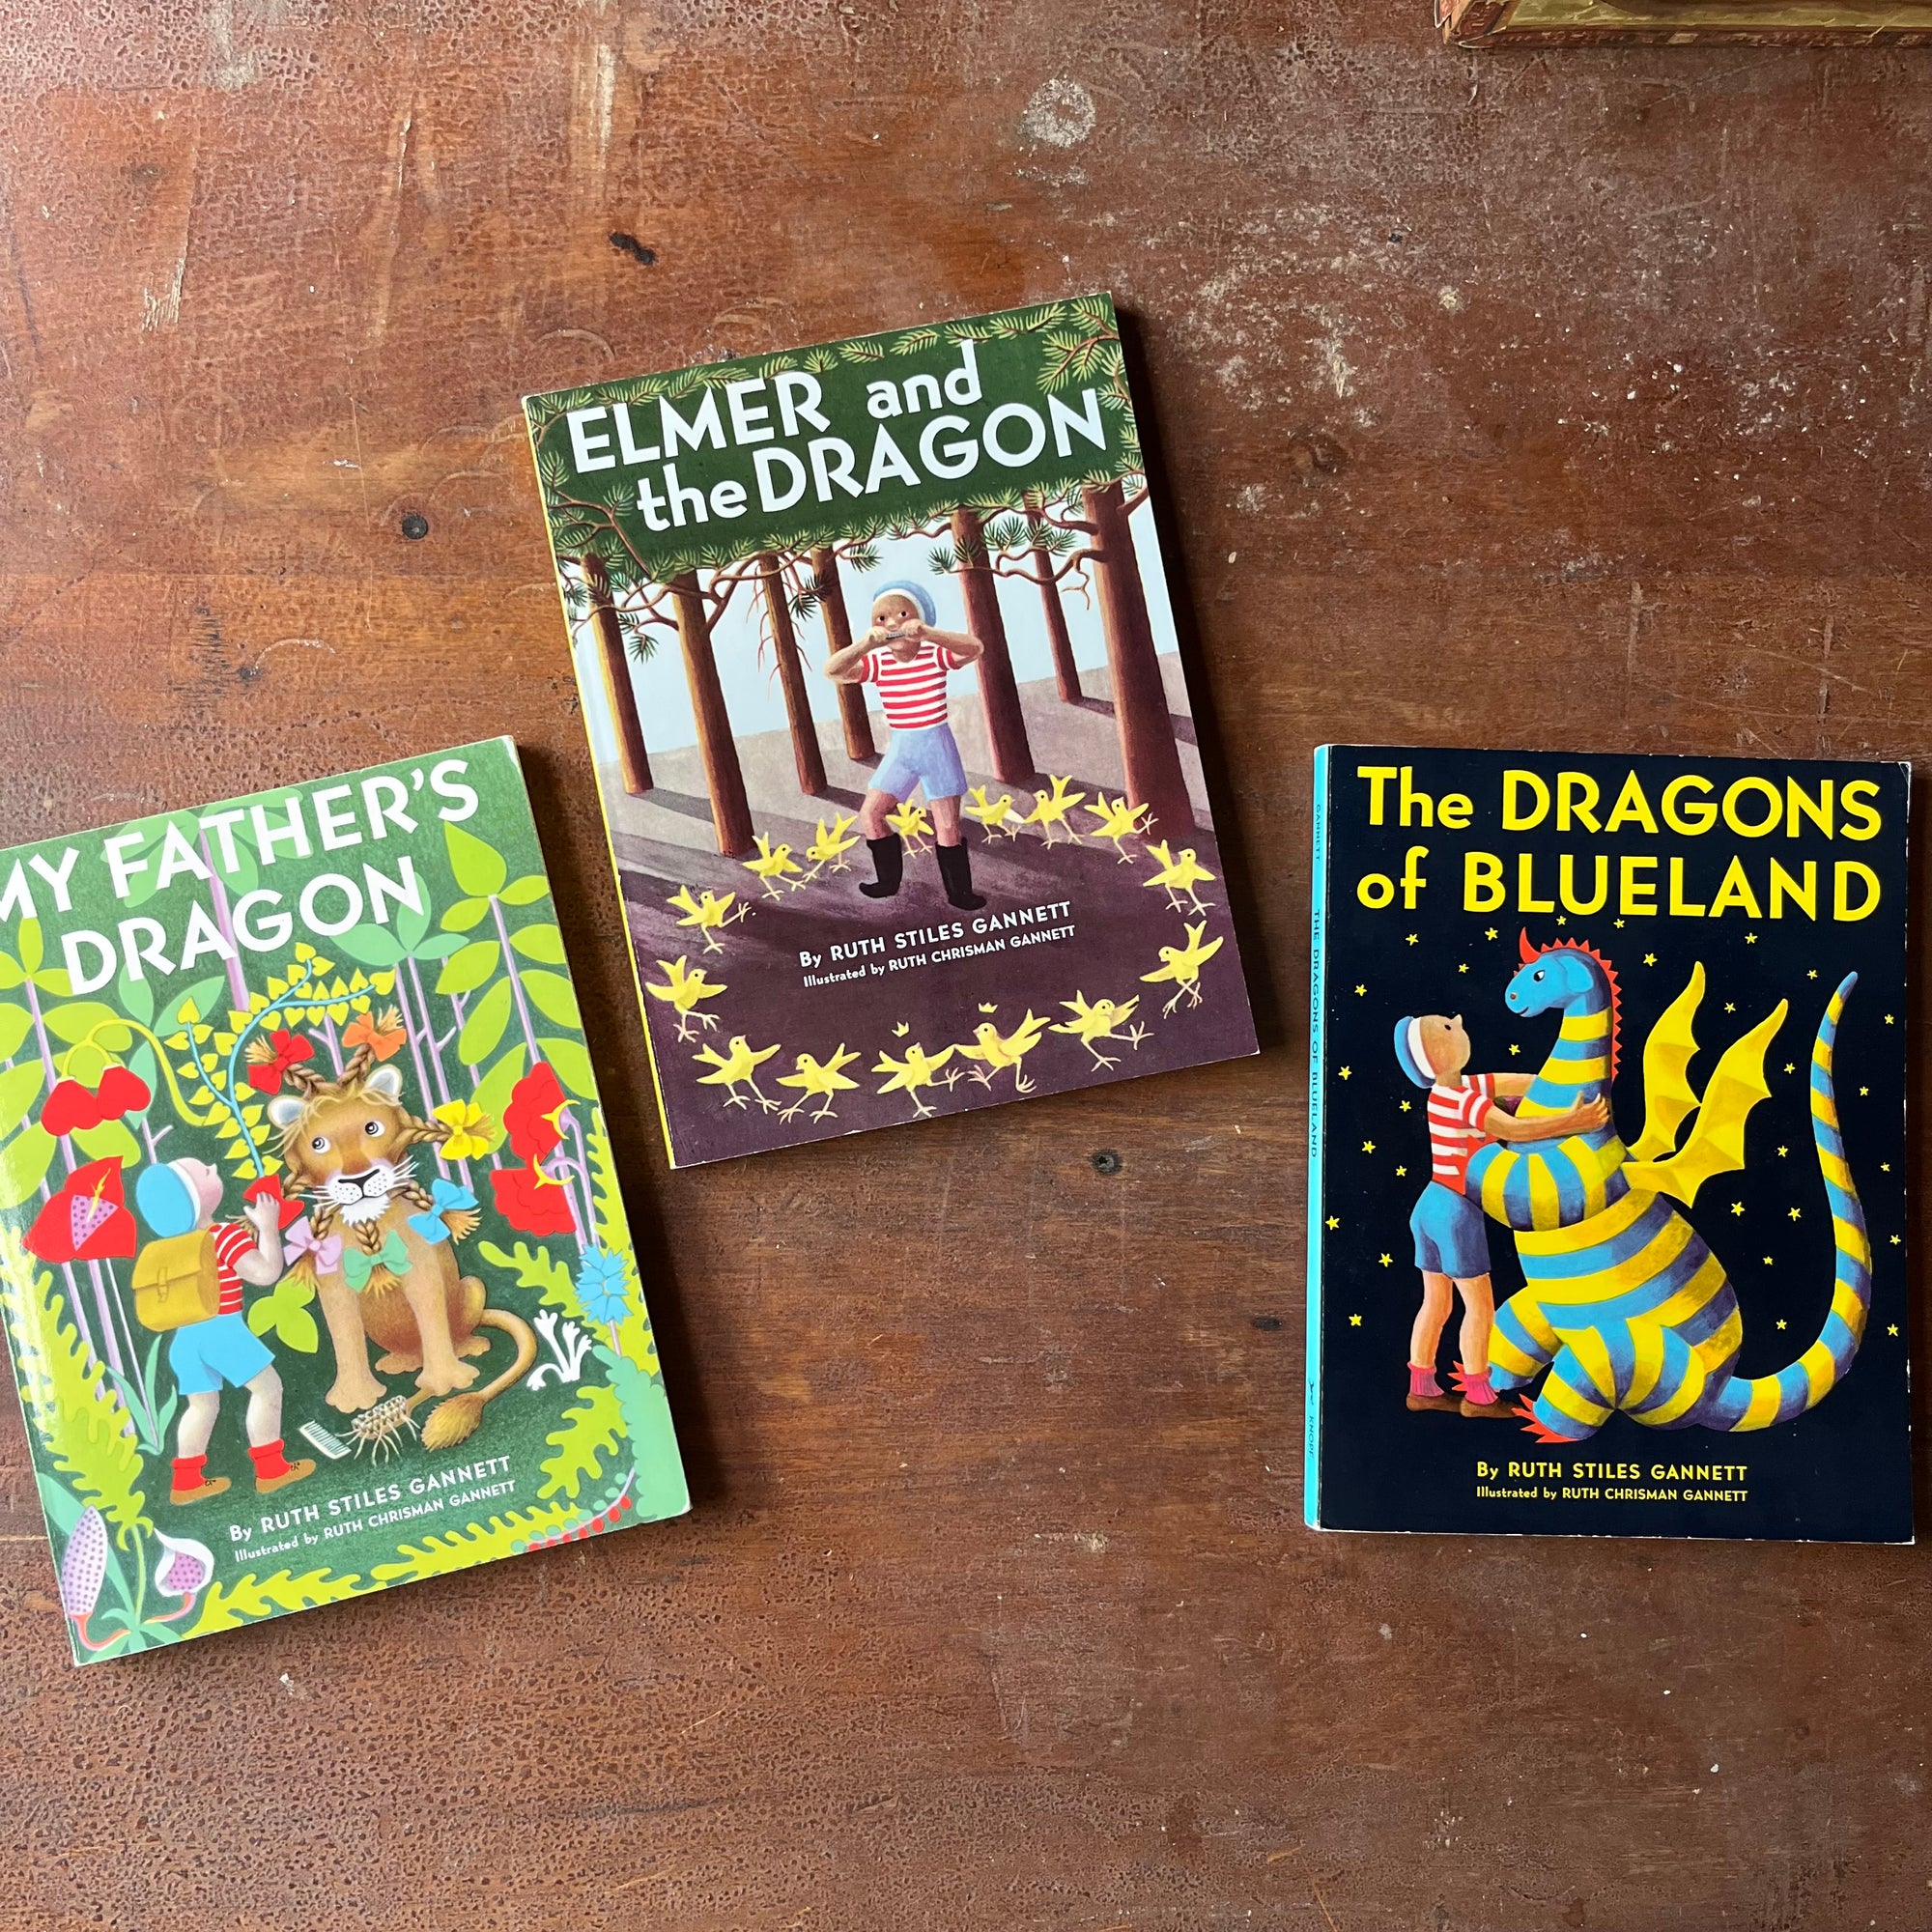 Log Cabin Vintage - vintage children's books, vintage children's classics, My Father's Dragon Tales - My Father's Dragon, Elmer and the Dragon, and The Dragons of Blueland Story and Illustrations by Ruth Stiles Gannett - view of the glossy front covers